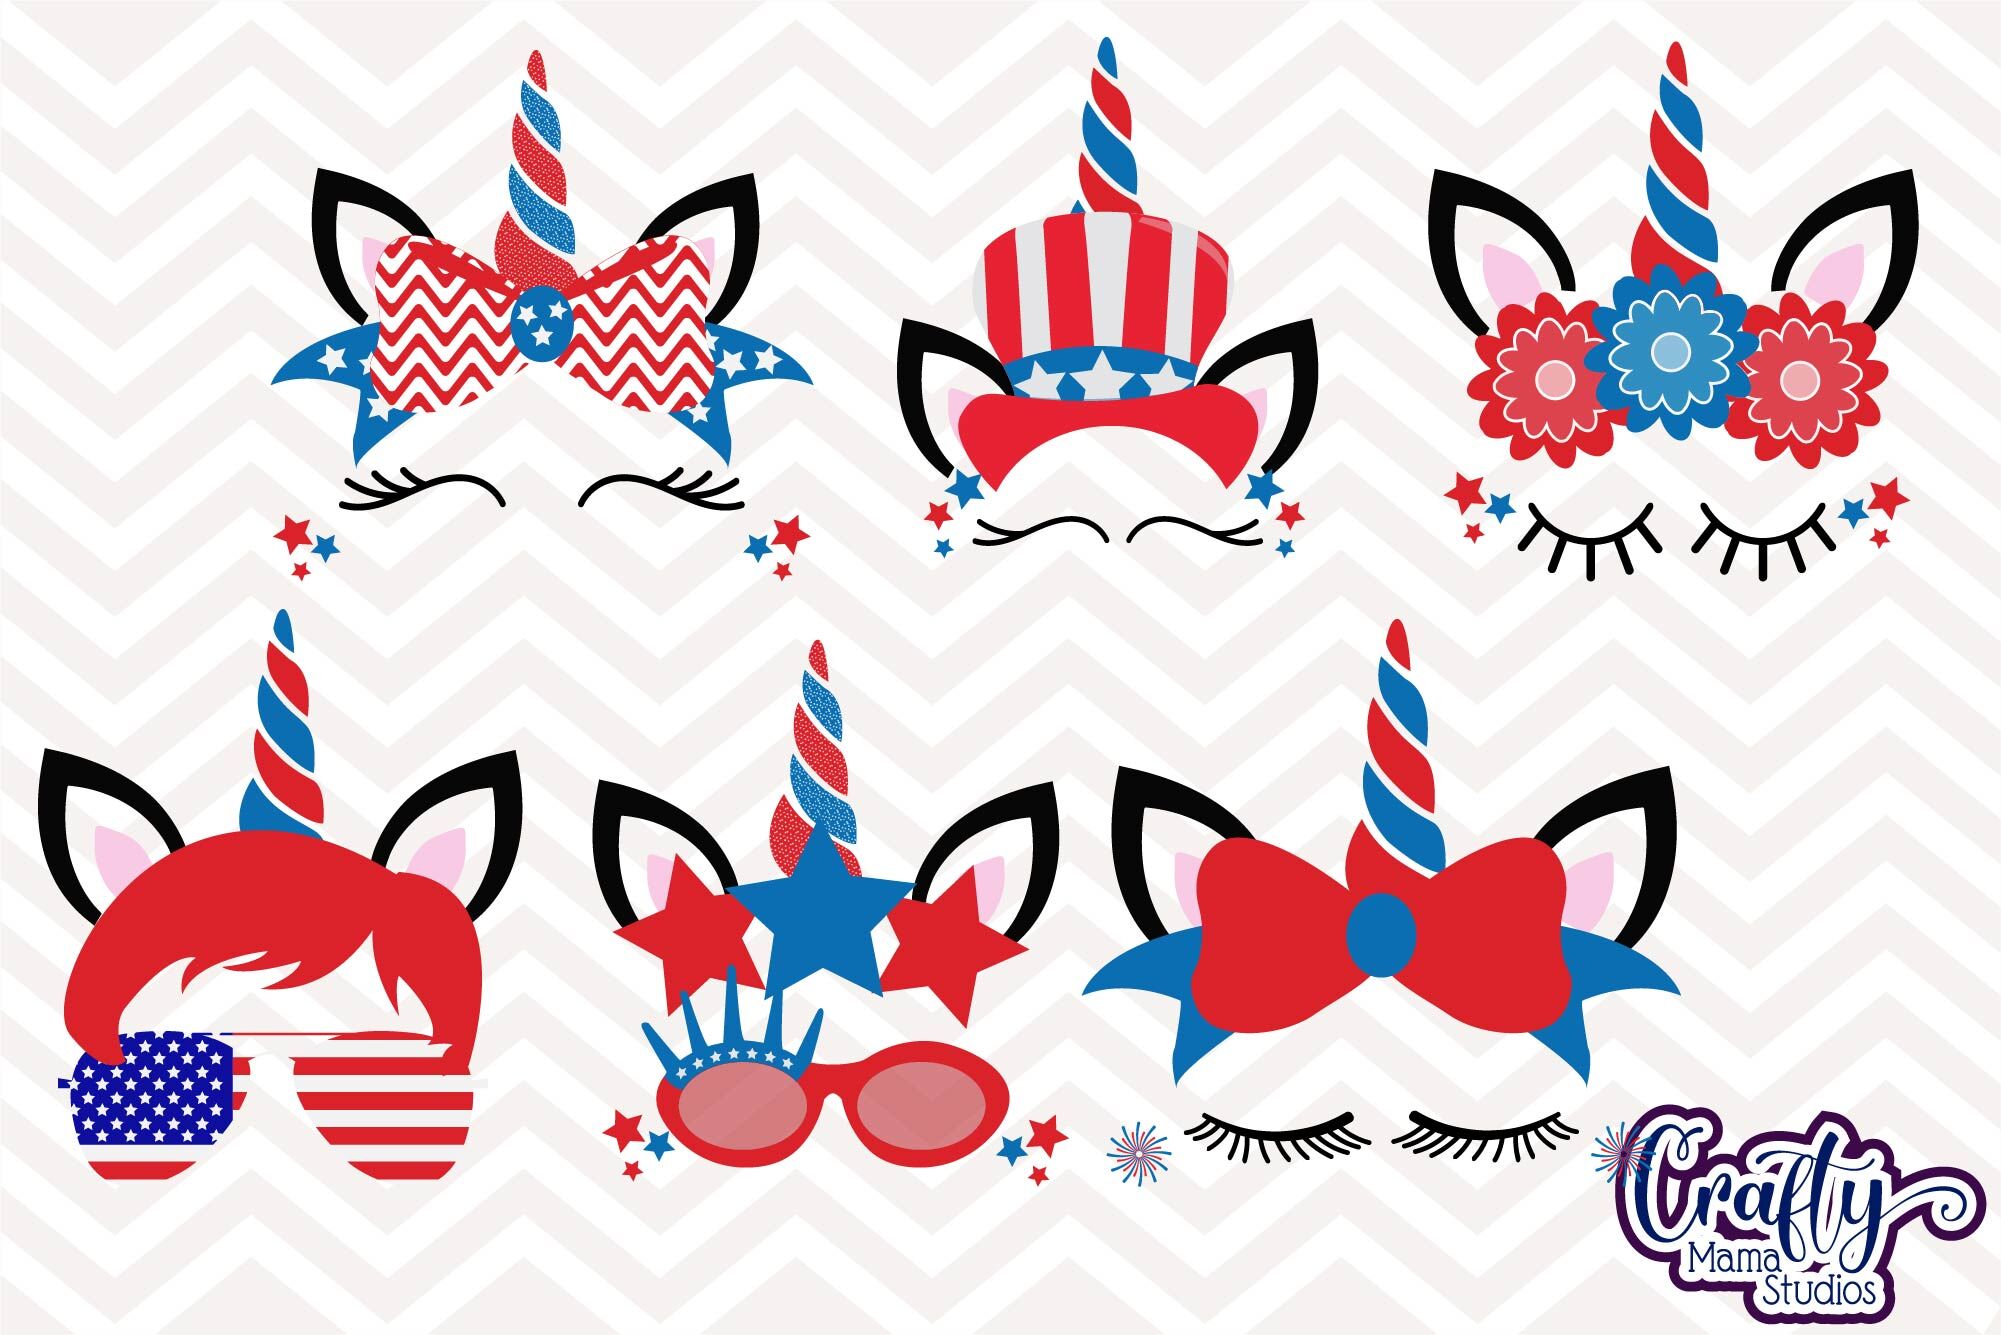 Download July 4th Unicorn Svg Independence Day Clip Art 4th Of July By Crafty Mama Studios Thehungryjpeg Com